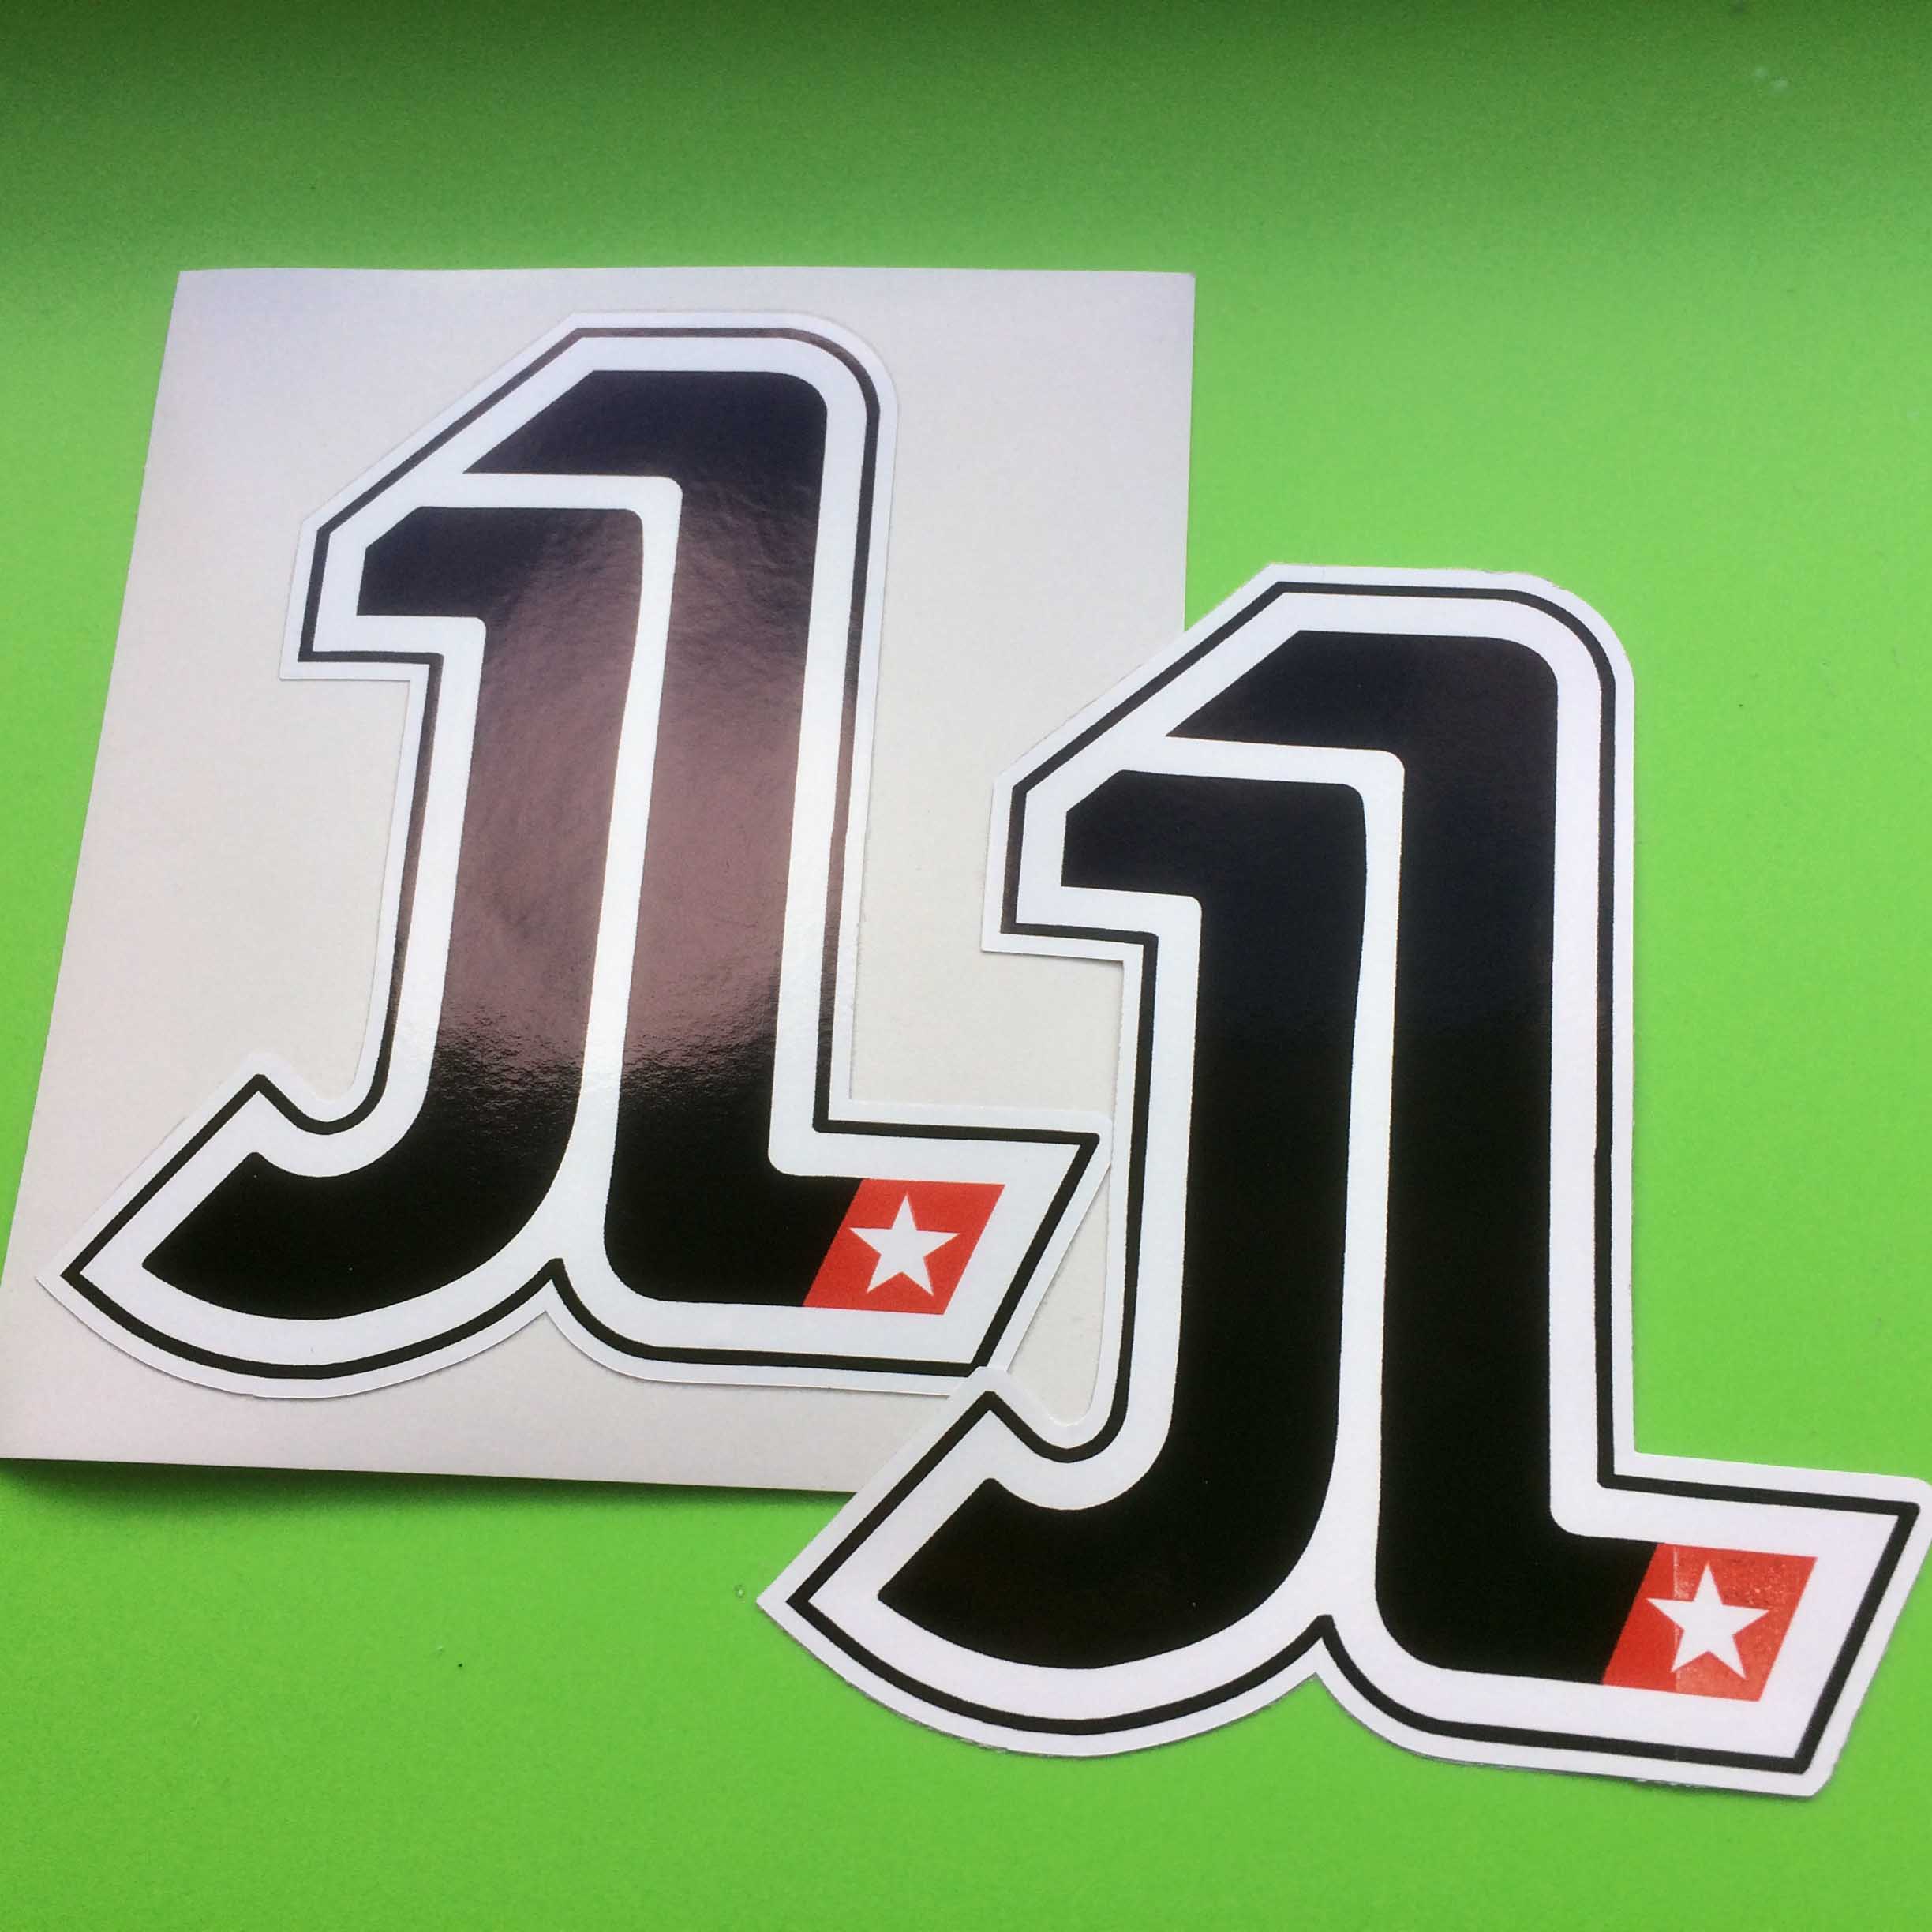 JL in bold black letters. The base of the L is partially red with a white star on it.